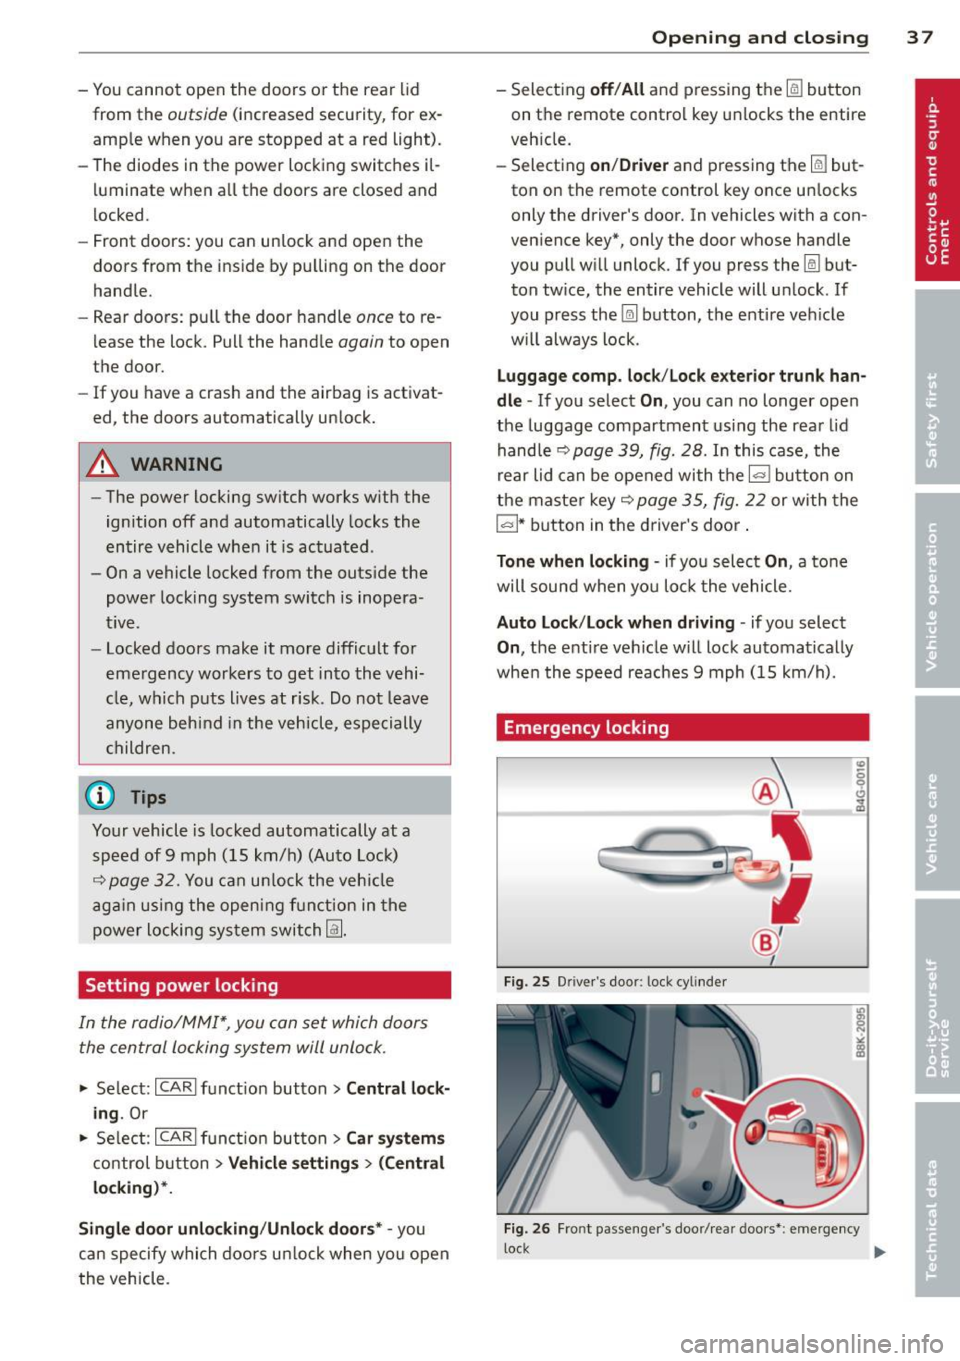 AUDI S4 SEDAN 2013  Owners Manual - You cannot  open  the  doors  or the  rear lid 
from  the 
outside (increased  security, for  ex­
ample  when you are  stopped  at  a red light). 
- The diodes  in the  power locking switches  il­